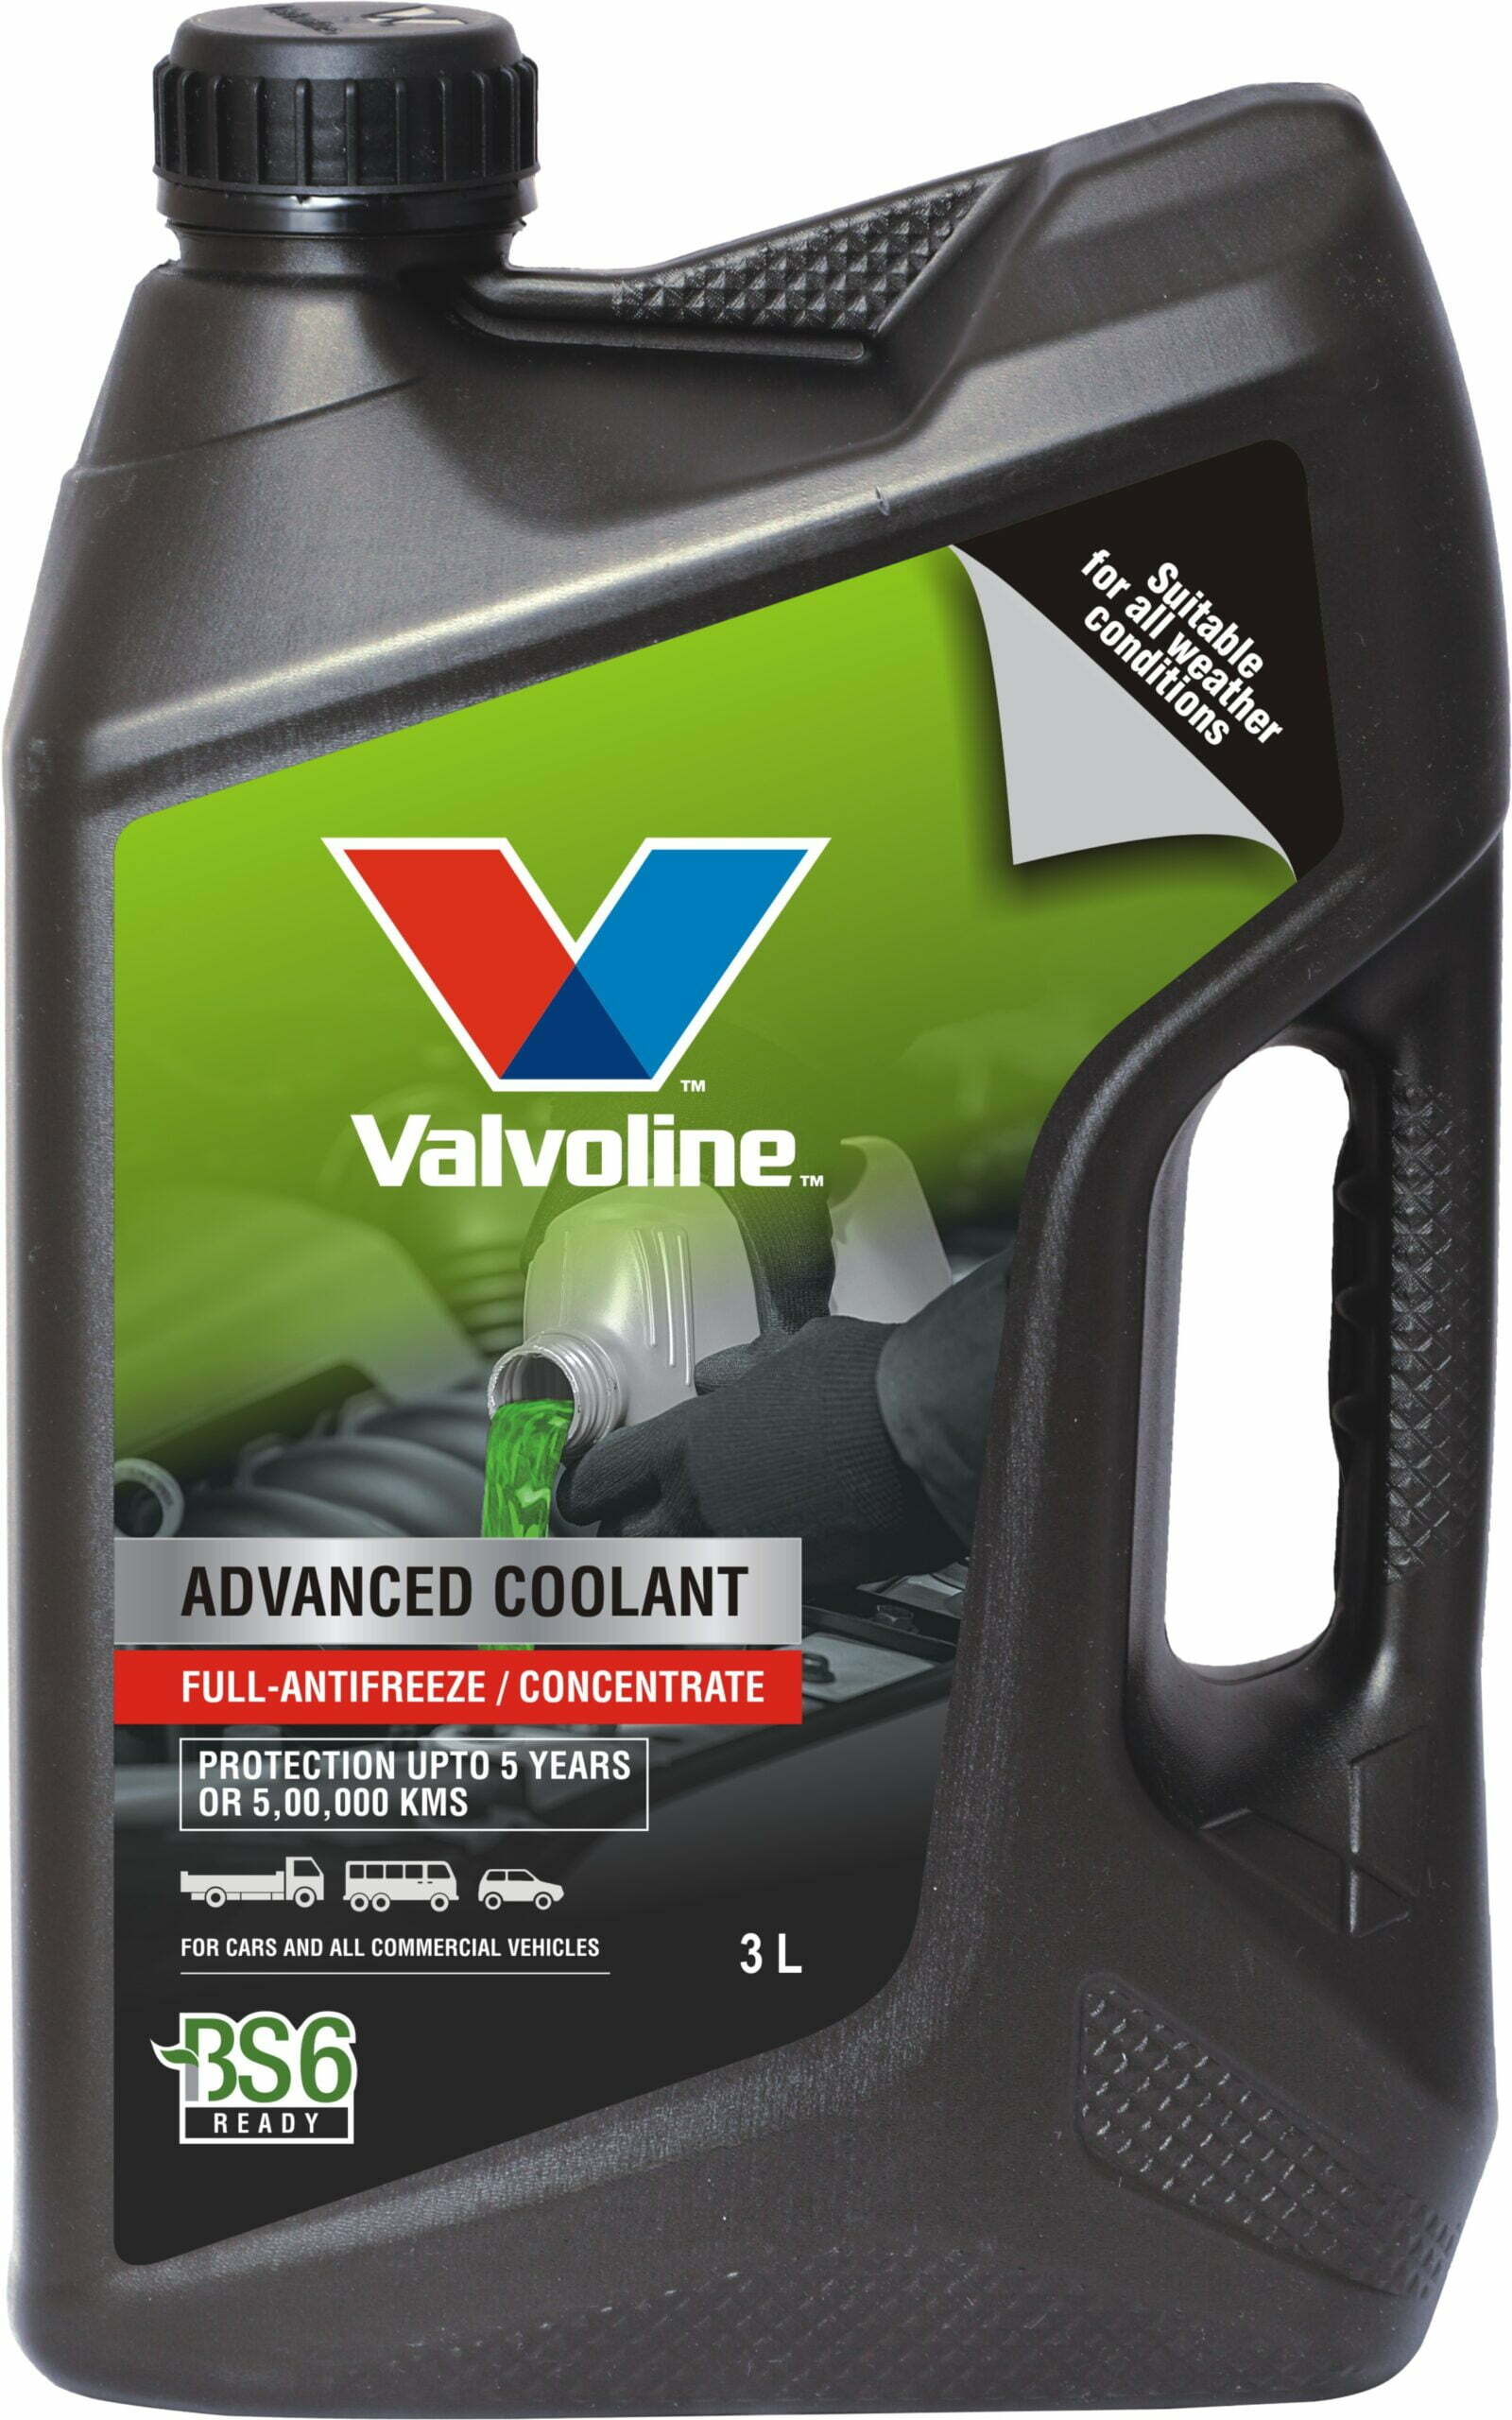 Valvoline Advanced Coolant Launched For Cars And Commercial Vehicles